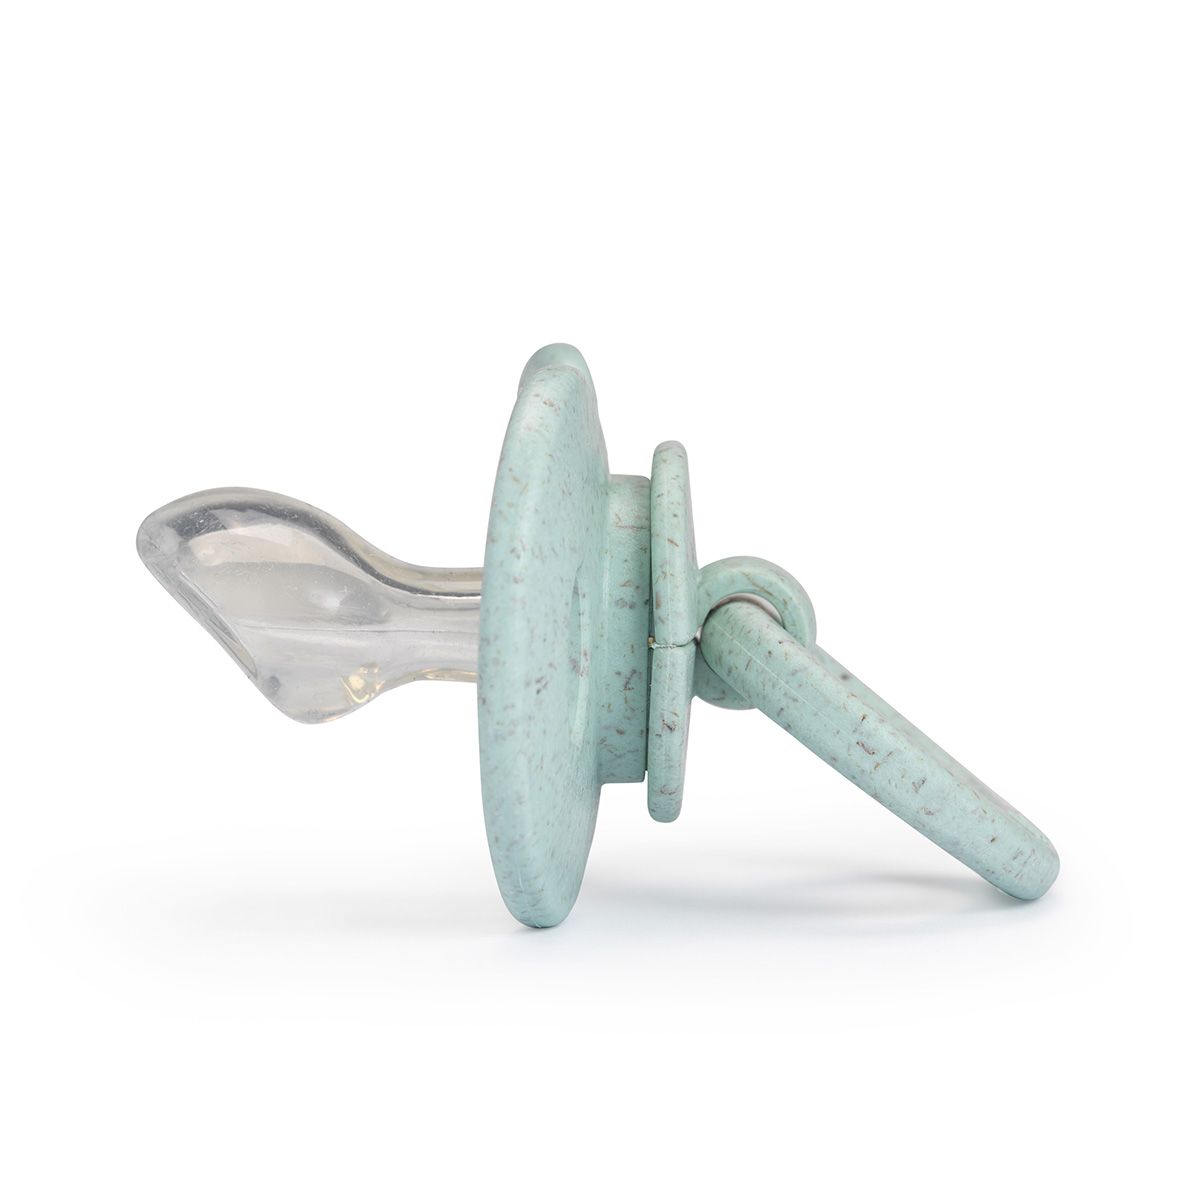 30105111179na-bamboo-pacifier-aqua-turquoise-2-ss22-pp